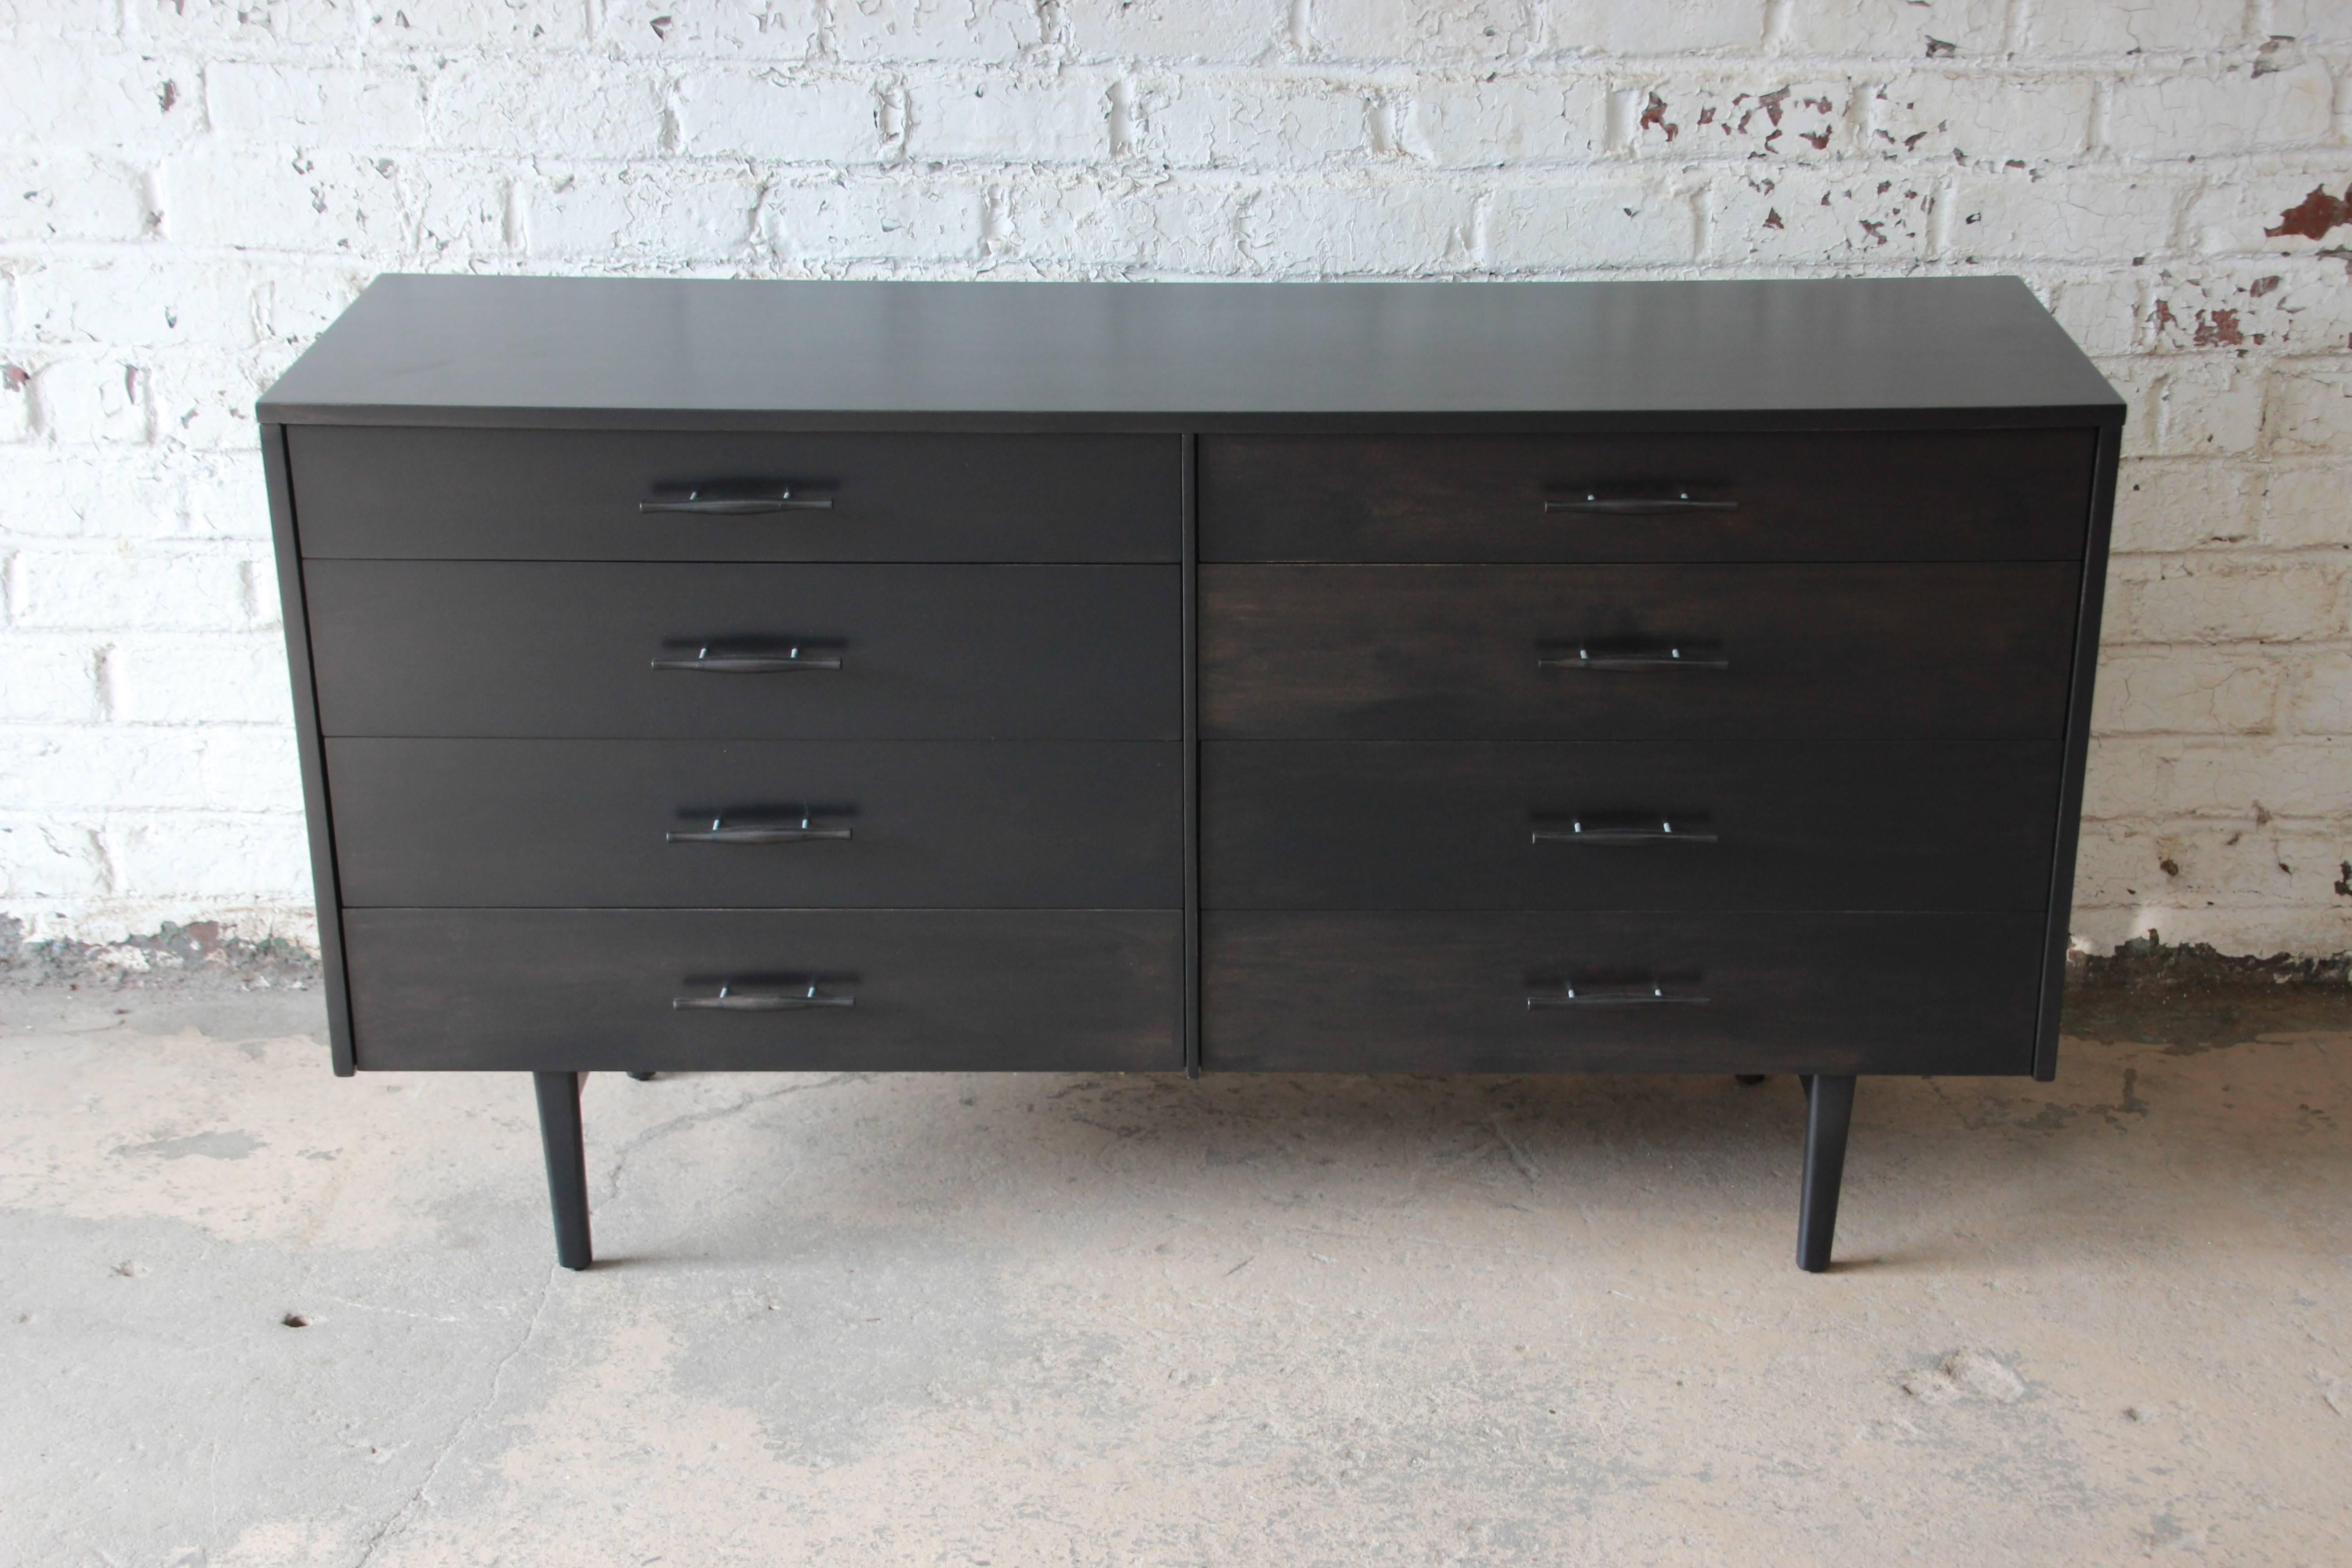 Offering a fantastic Paul McCobb ebonized eight-drawer dresser of credenza for planner group. This newly refinished piece has eight smooth sliding drawers with aluminum and ebonized wood pulls. It has unique slanted tapered legs and is a rare design